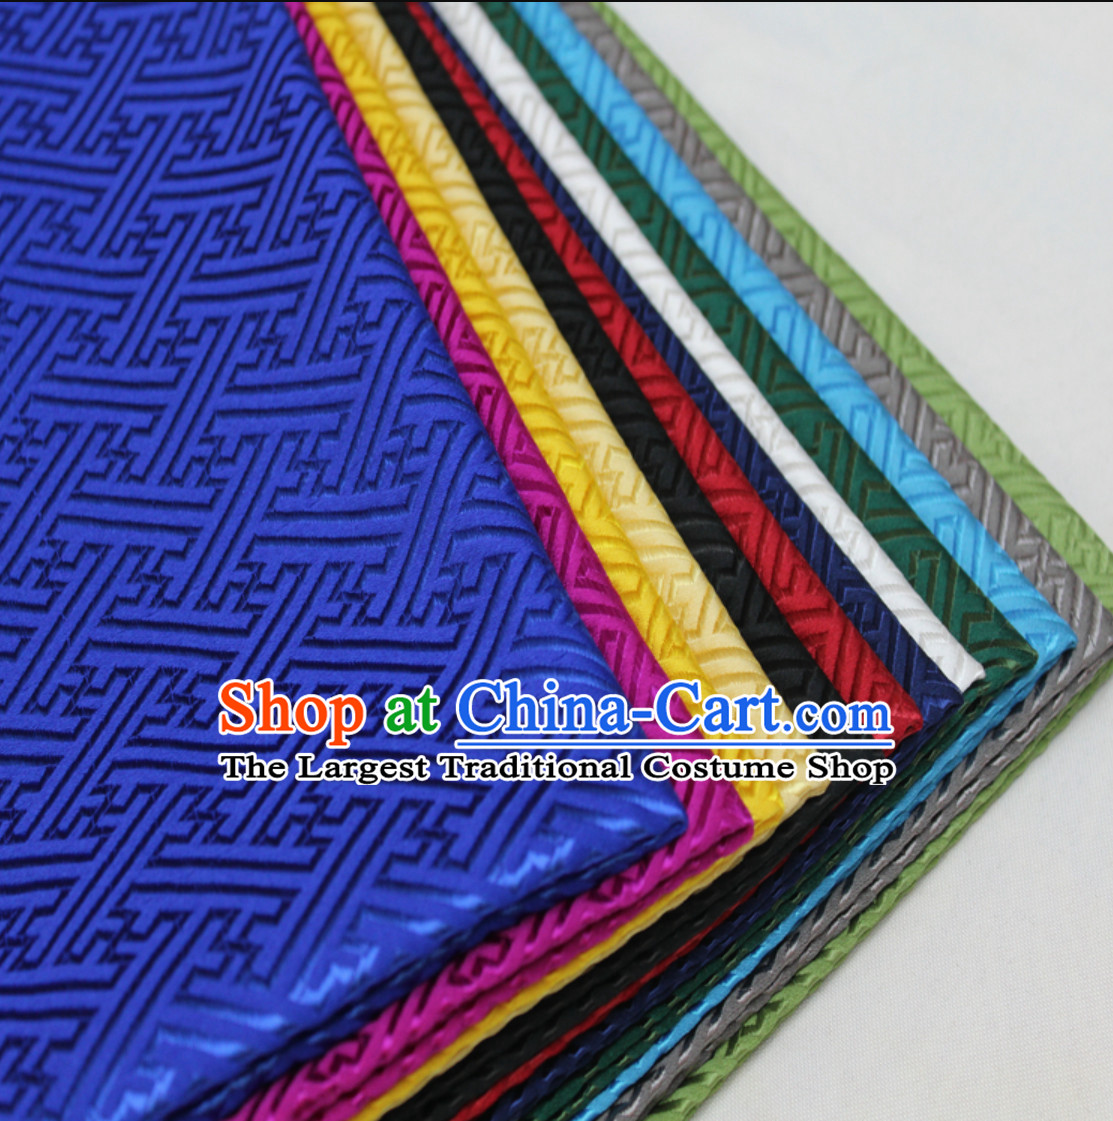 Top Chinese Classical Brocade Fabric Traditional Clothing Fabric